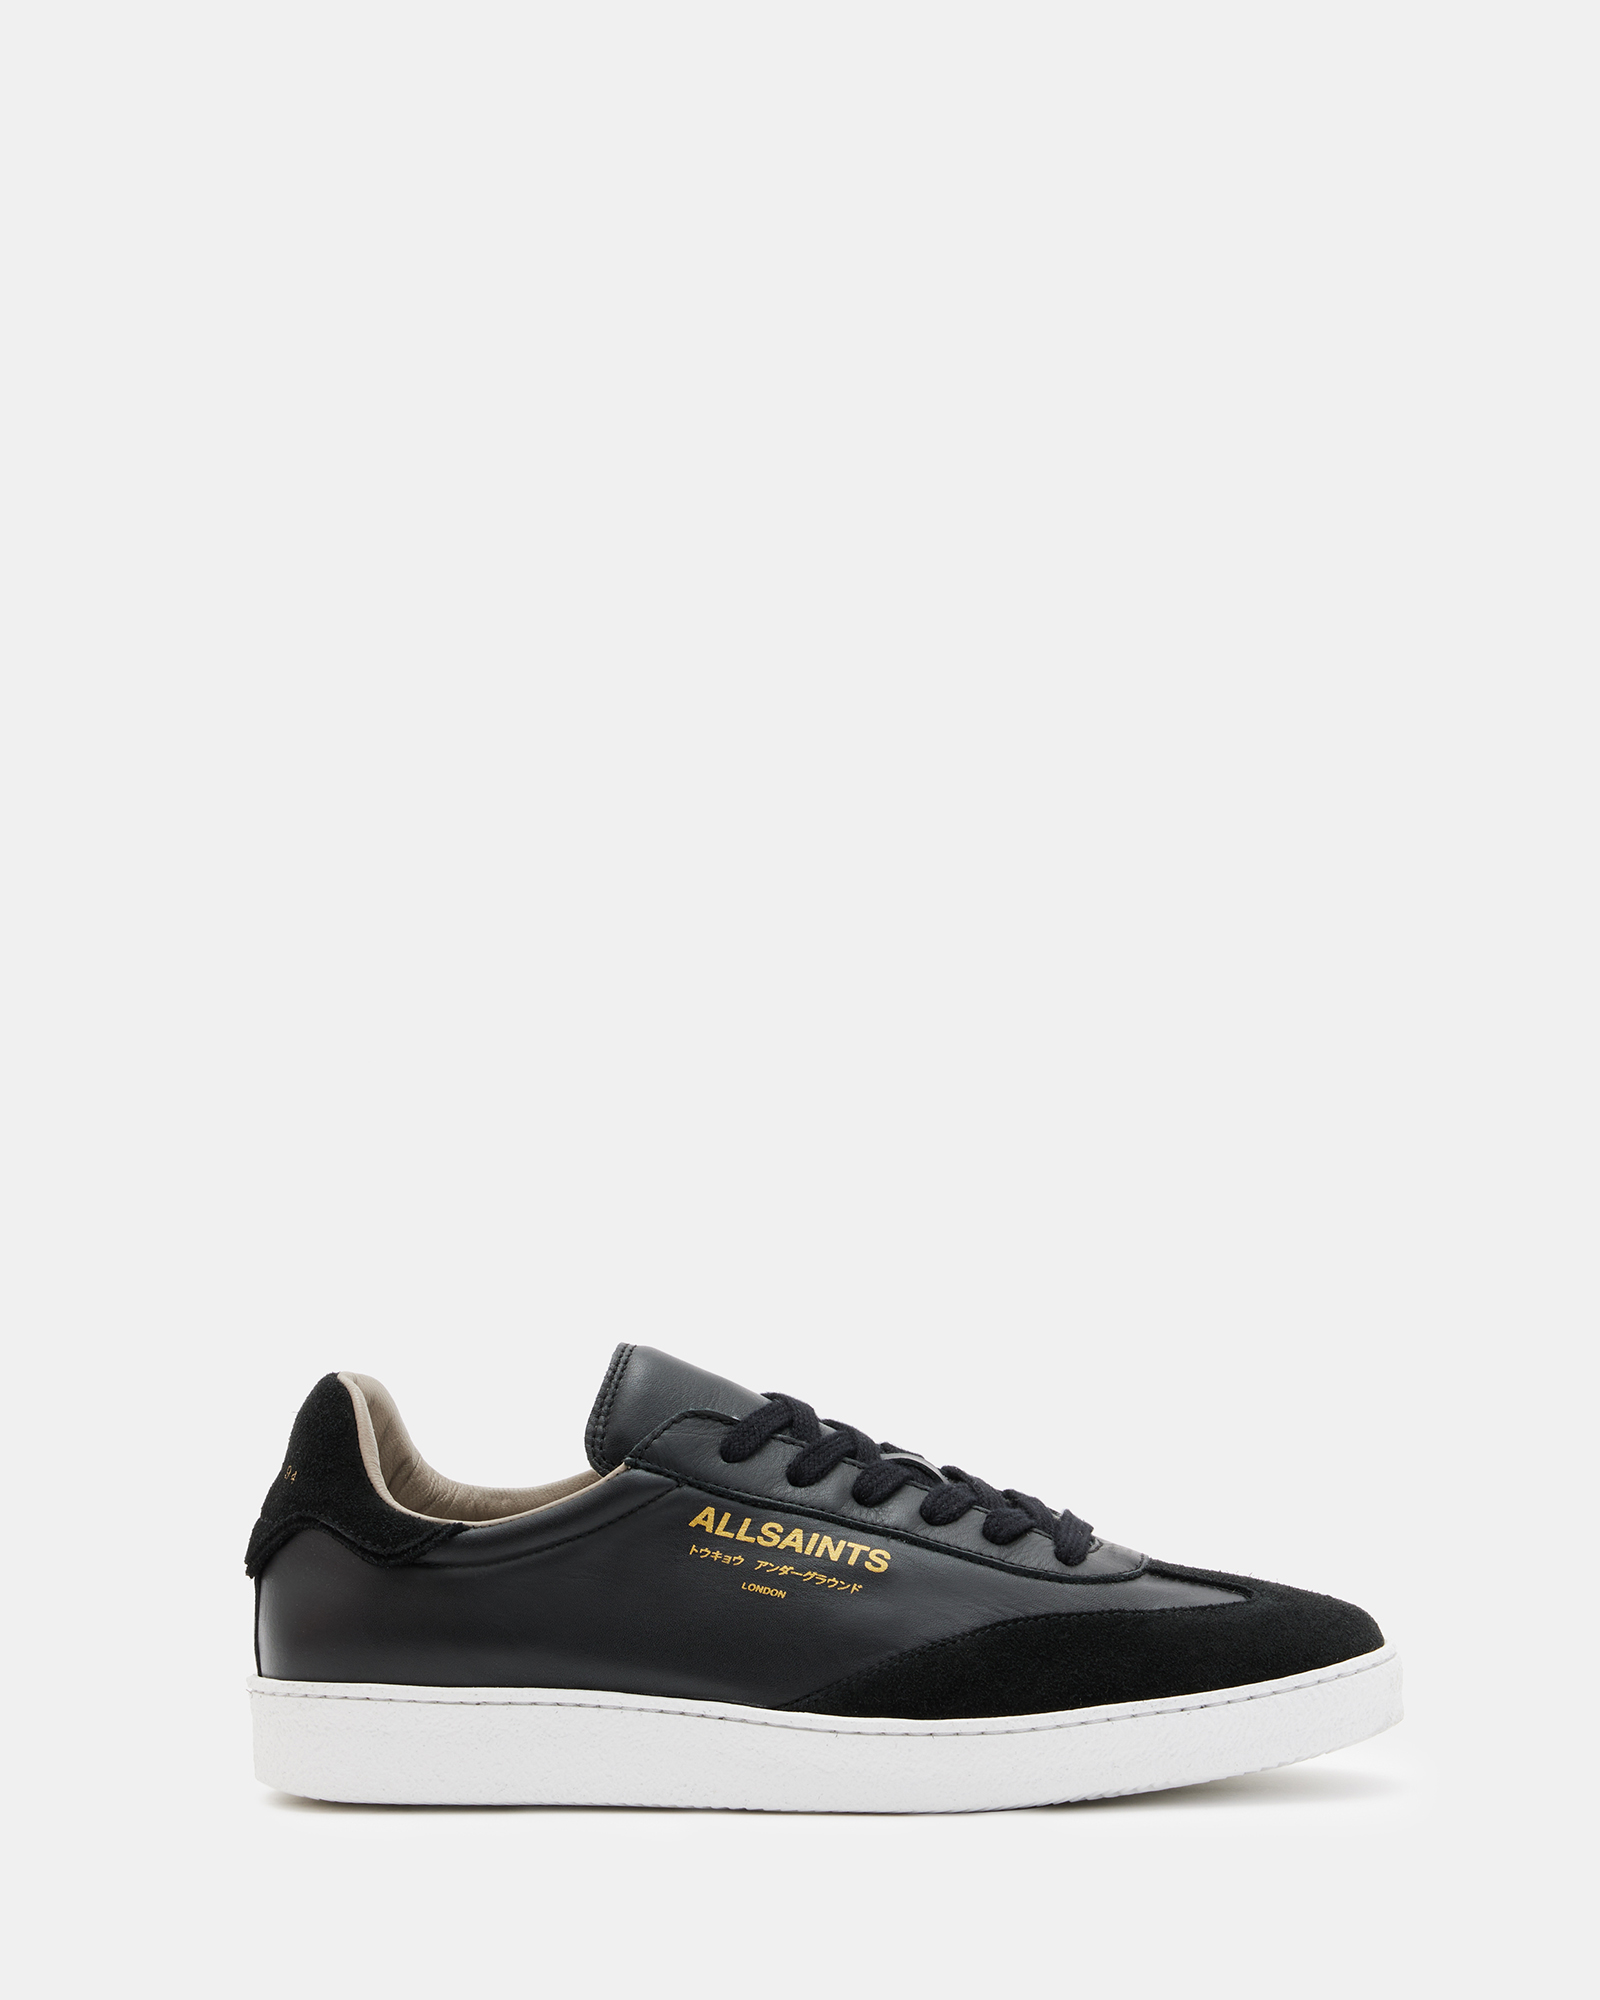 AllSaints Thelma Leather Low Top Trainers,, Black